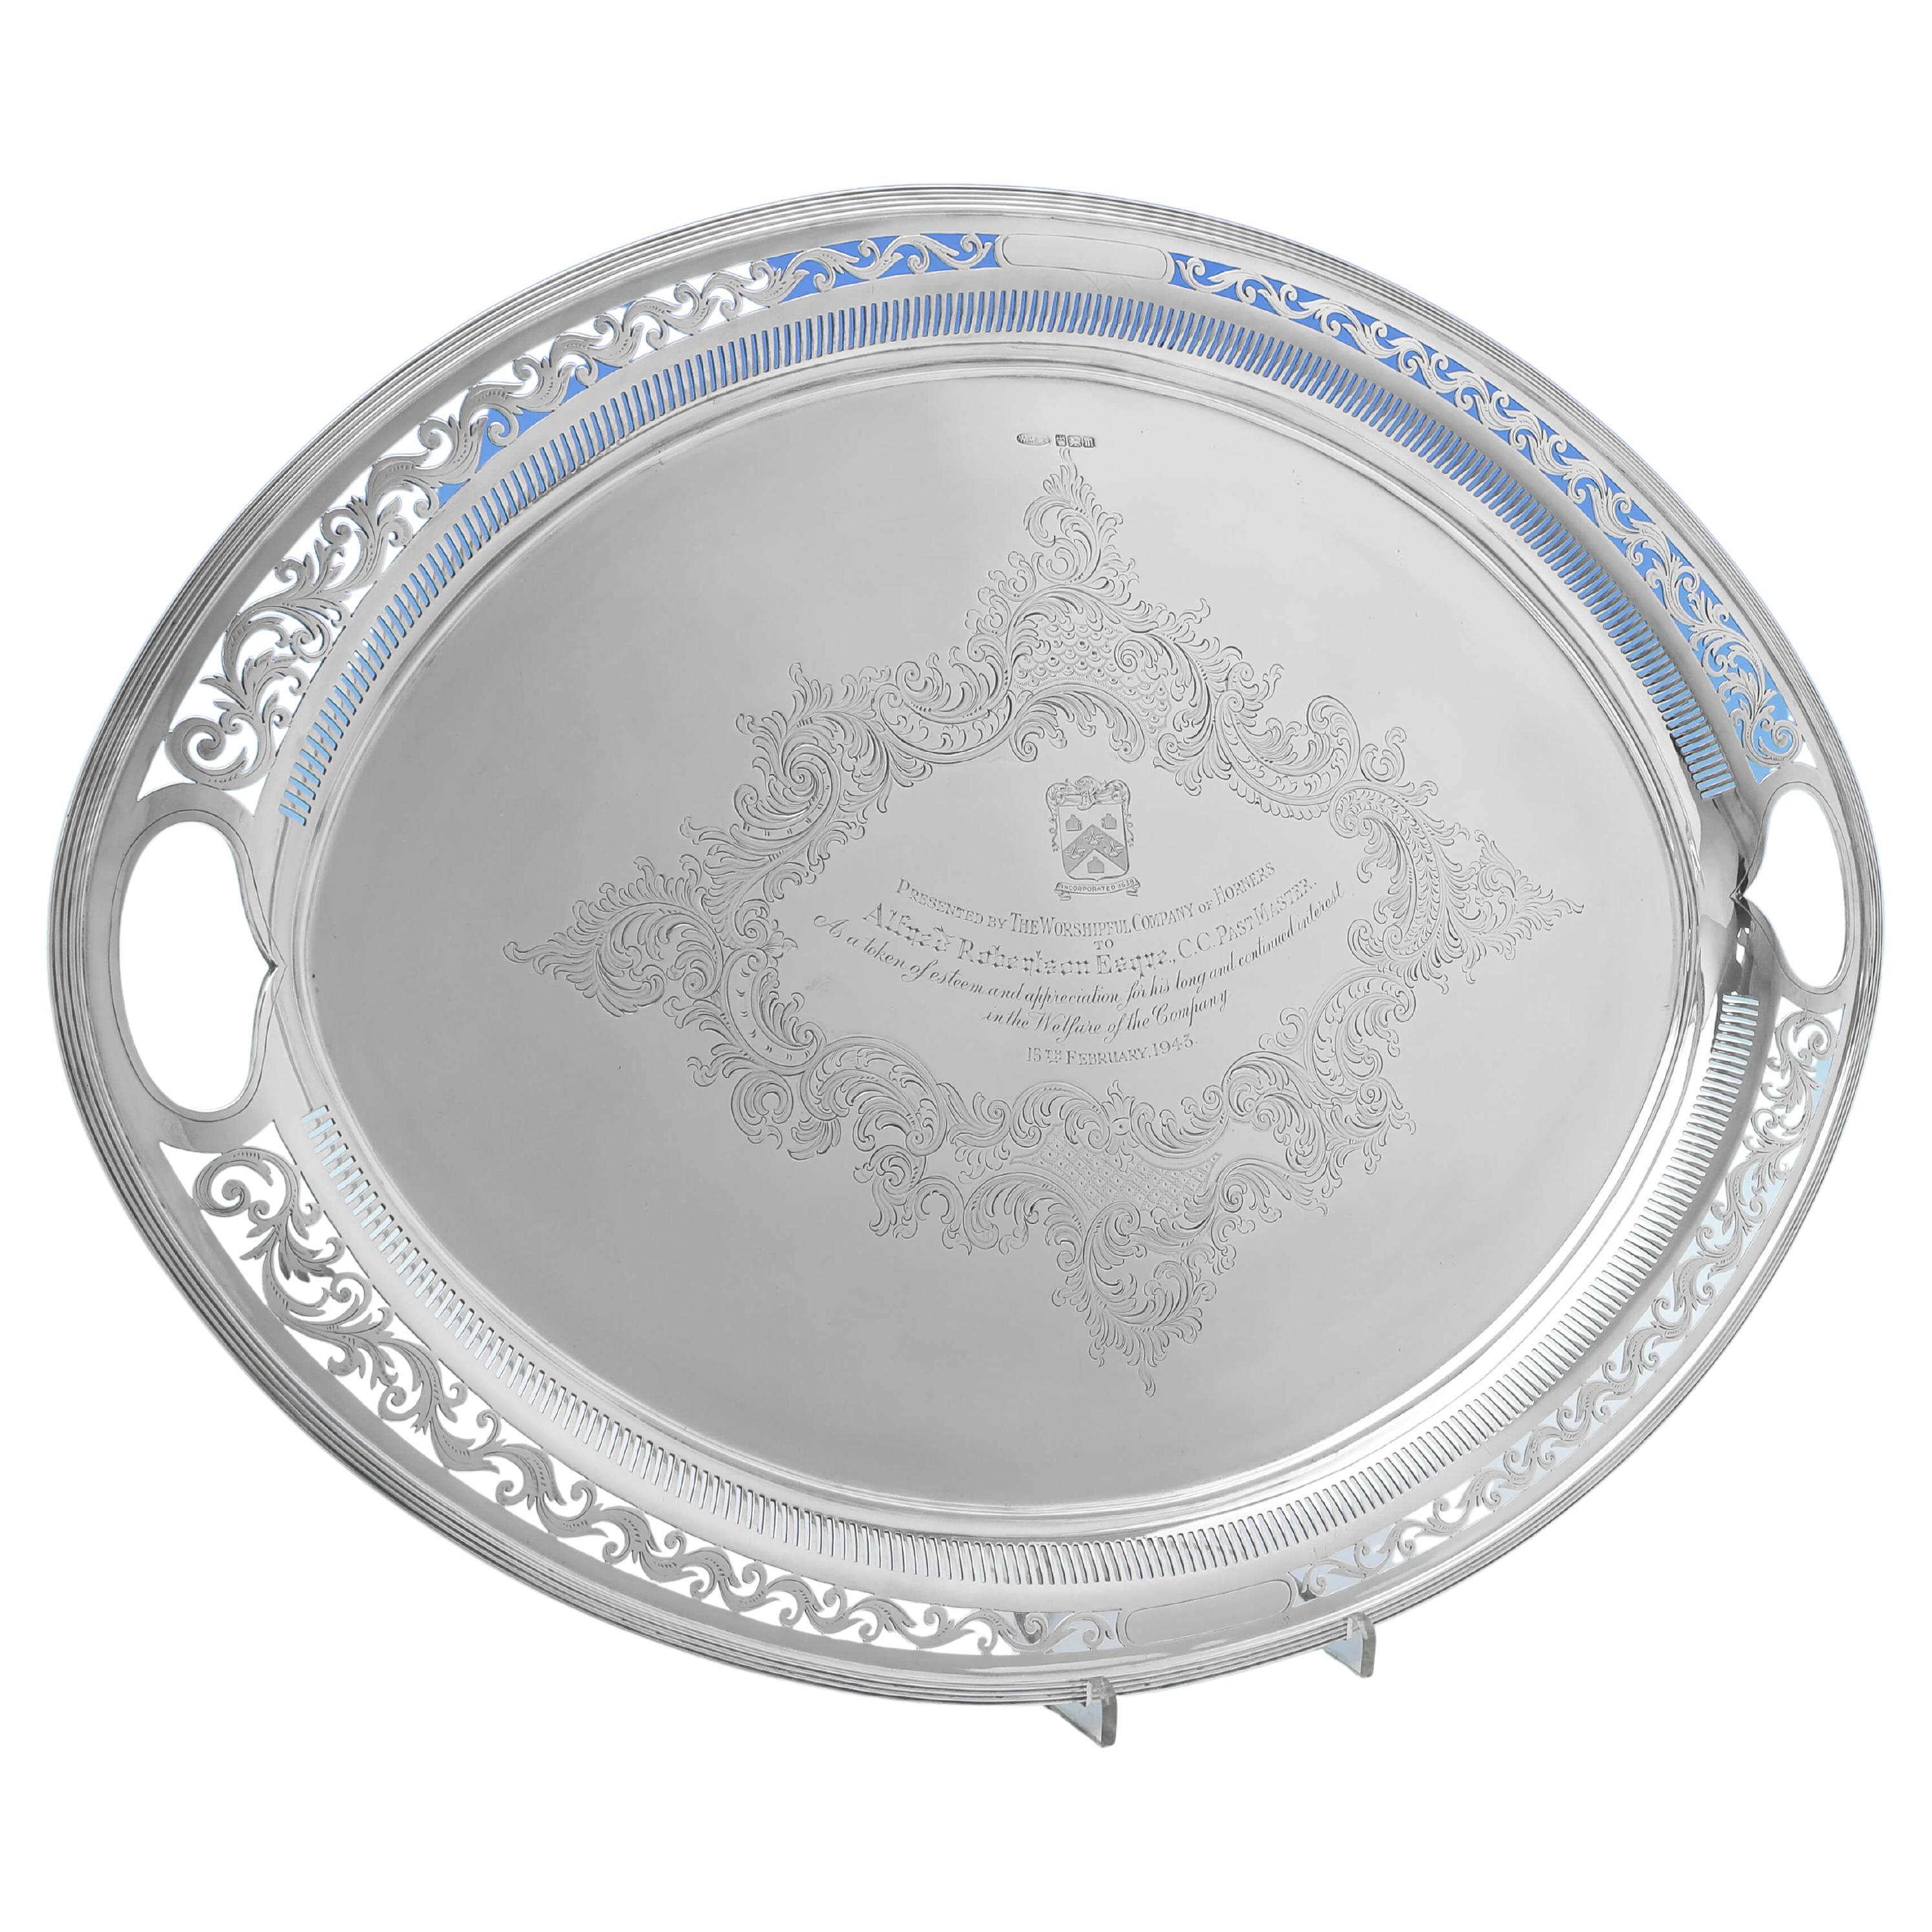 Worshipful Company of Horners, Presentation Tray, Antique Sterling Silver, 1904